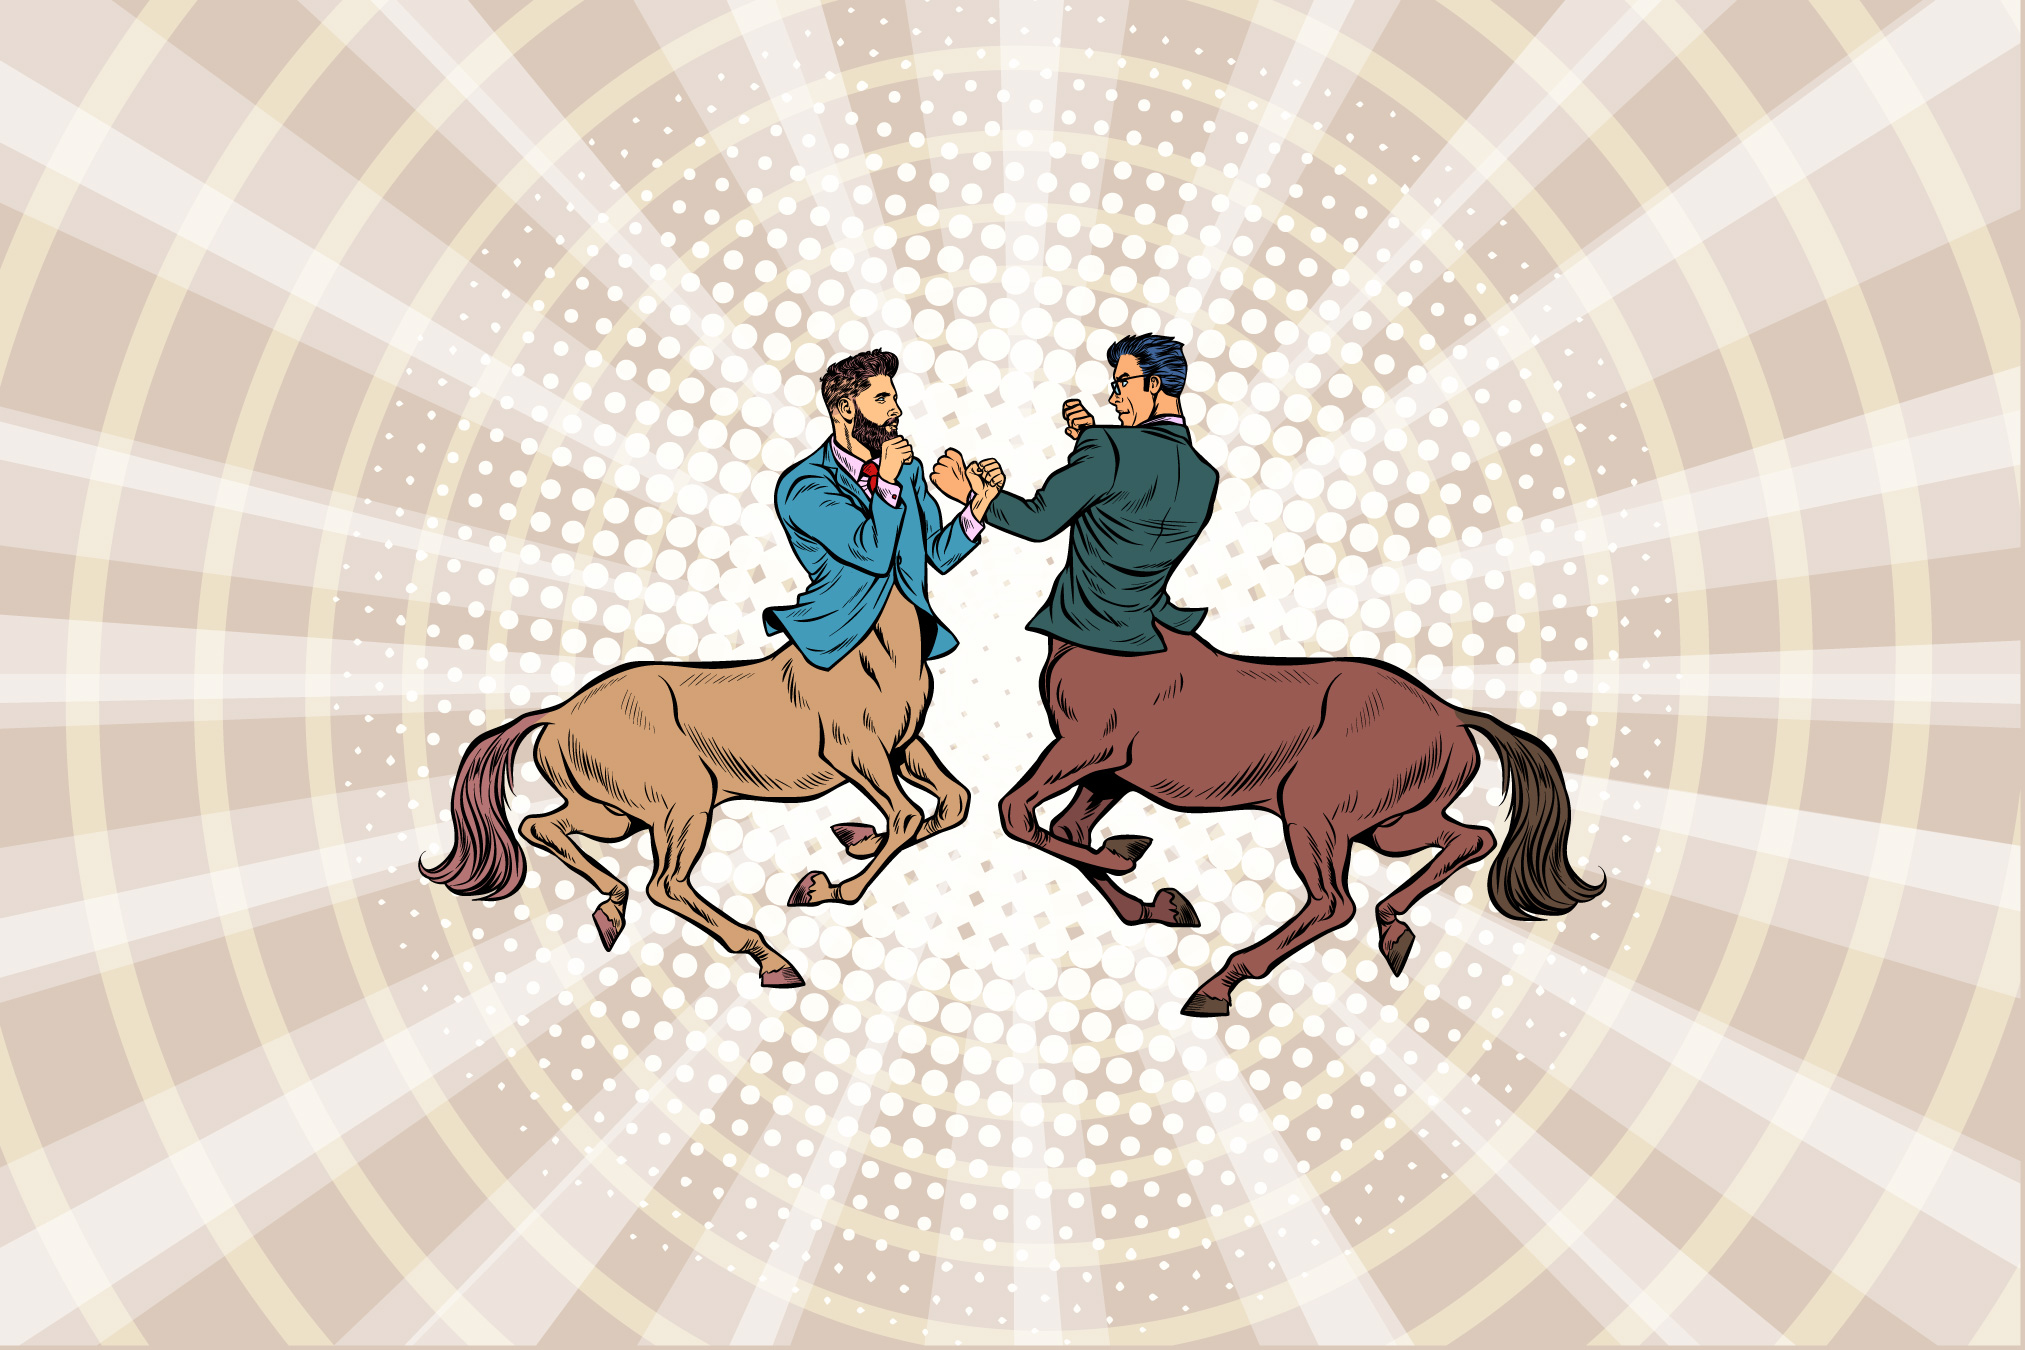 Two centaurs dressed as businessmen, fighting